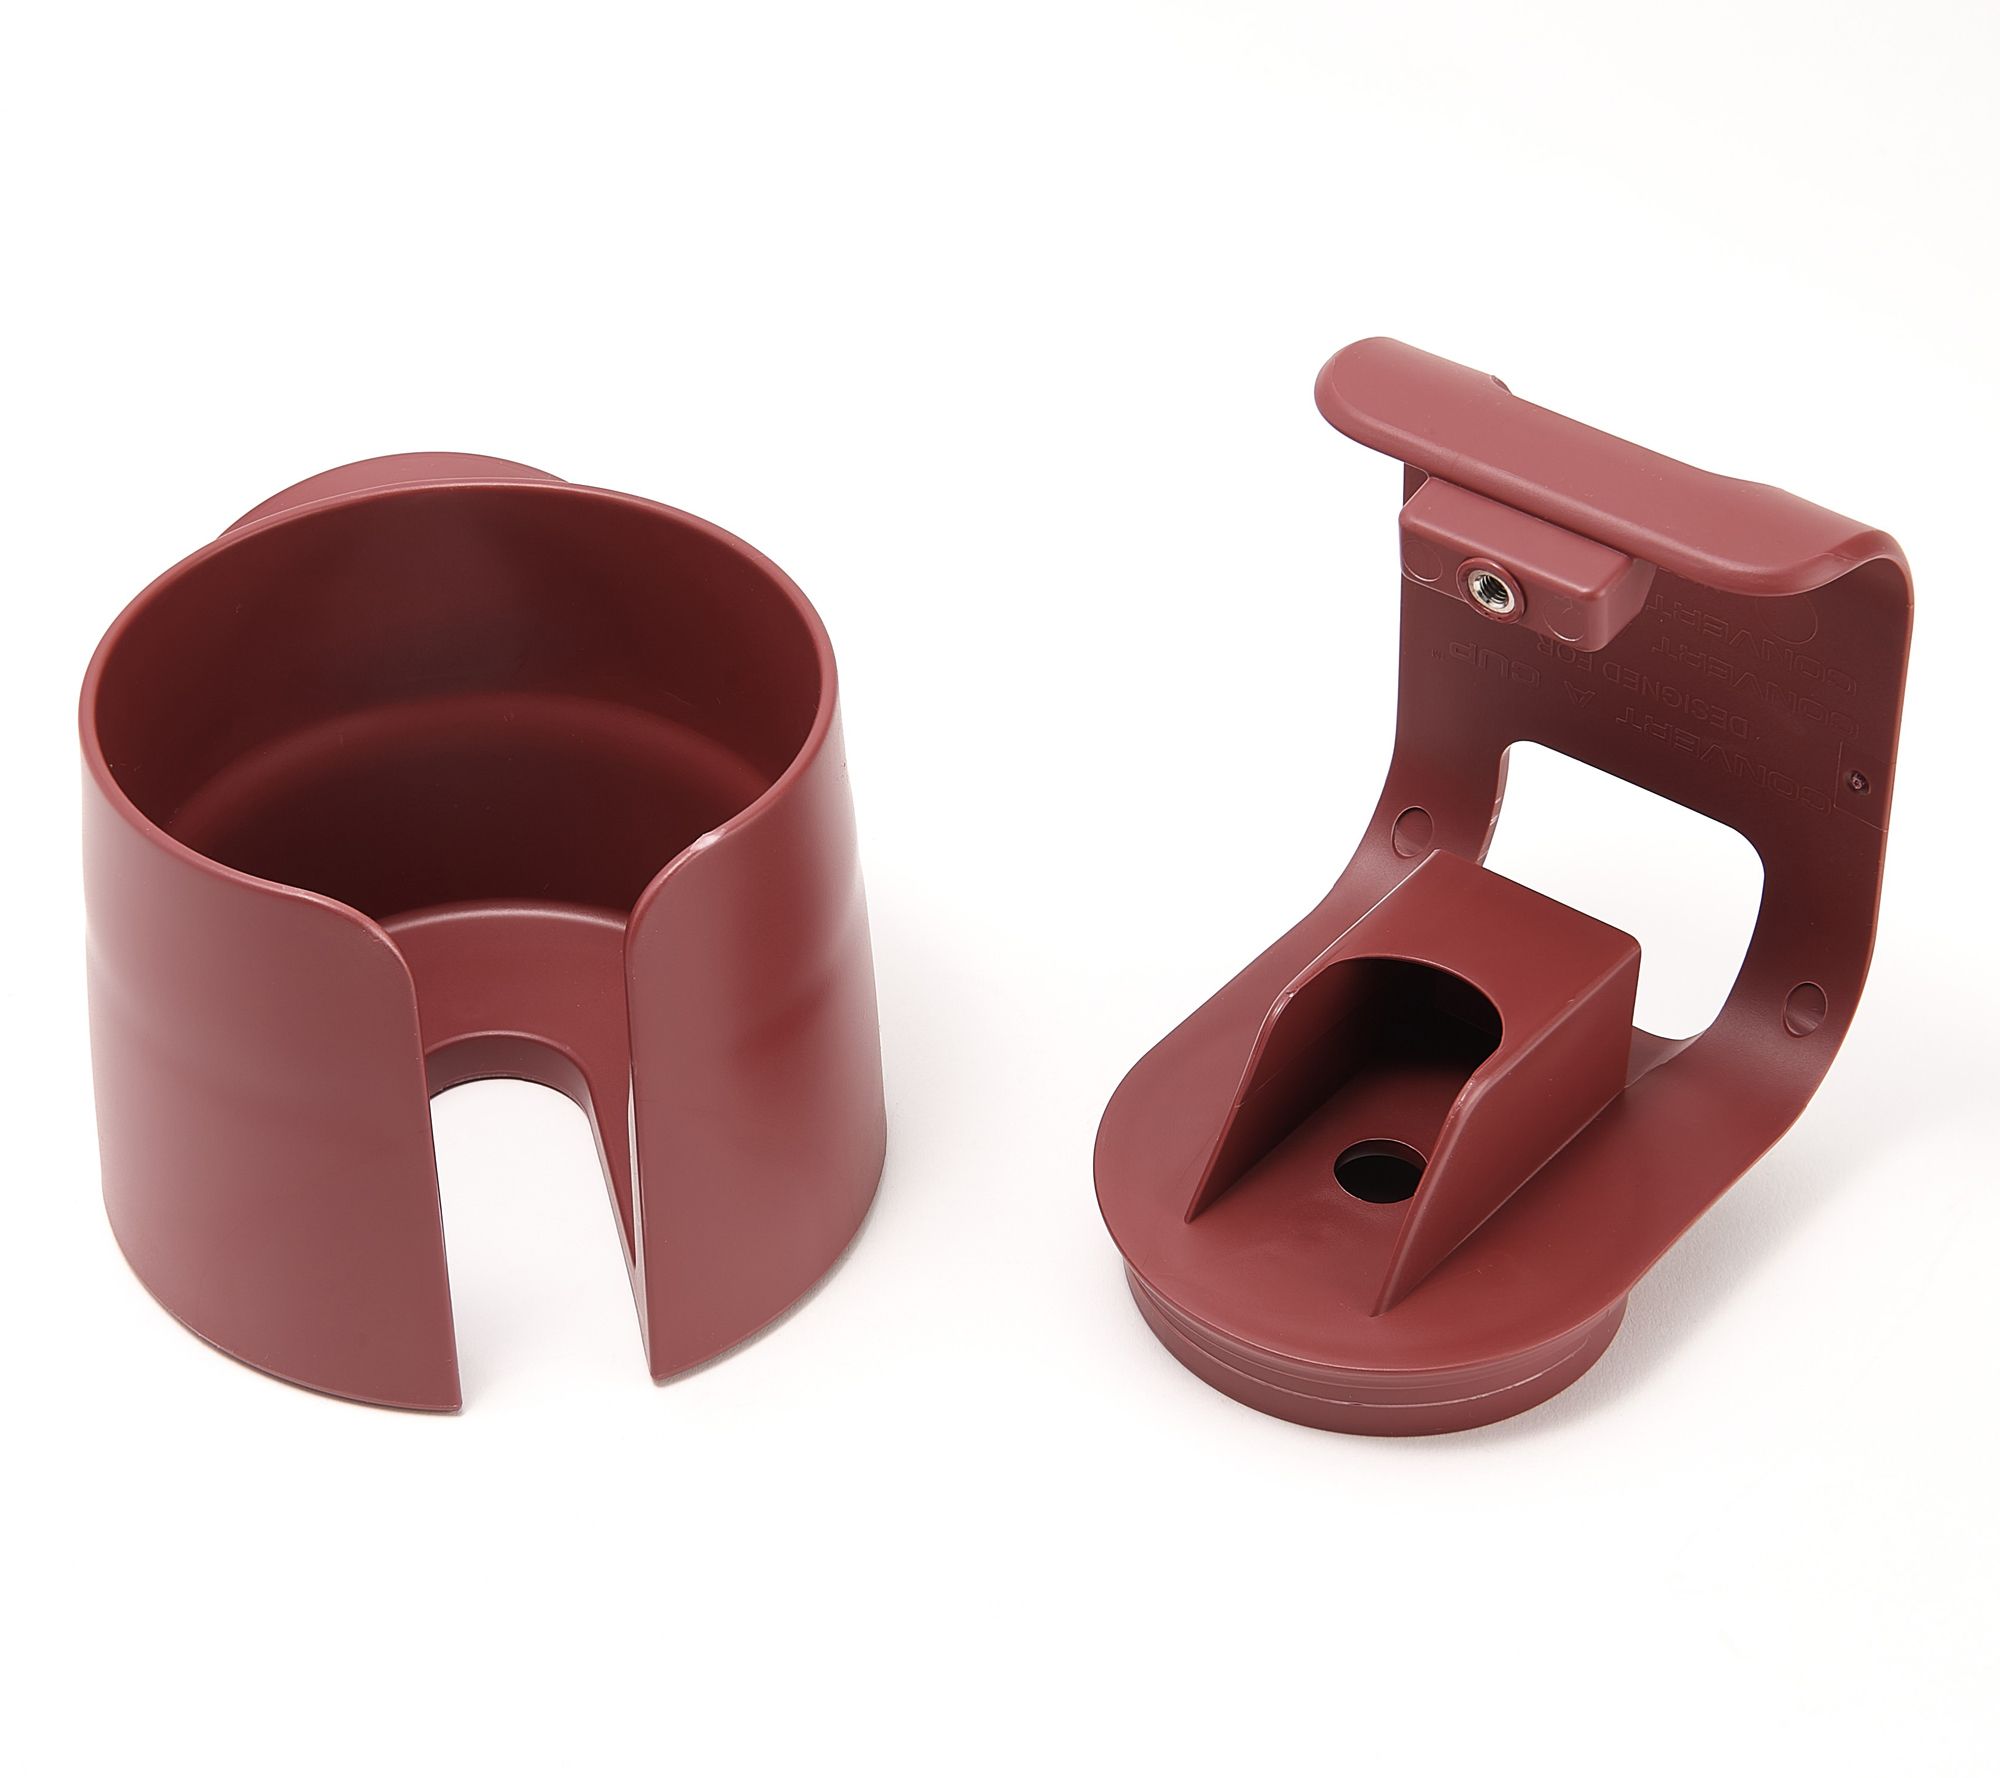 Convert-A-Cup Easy Attach Cup Holder for Convert-A-Bench or Chair